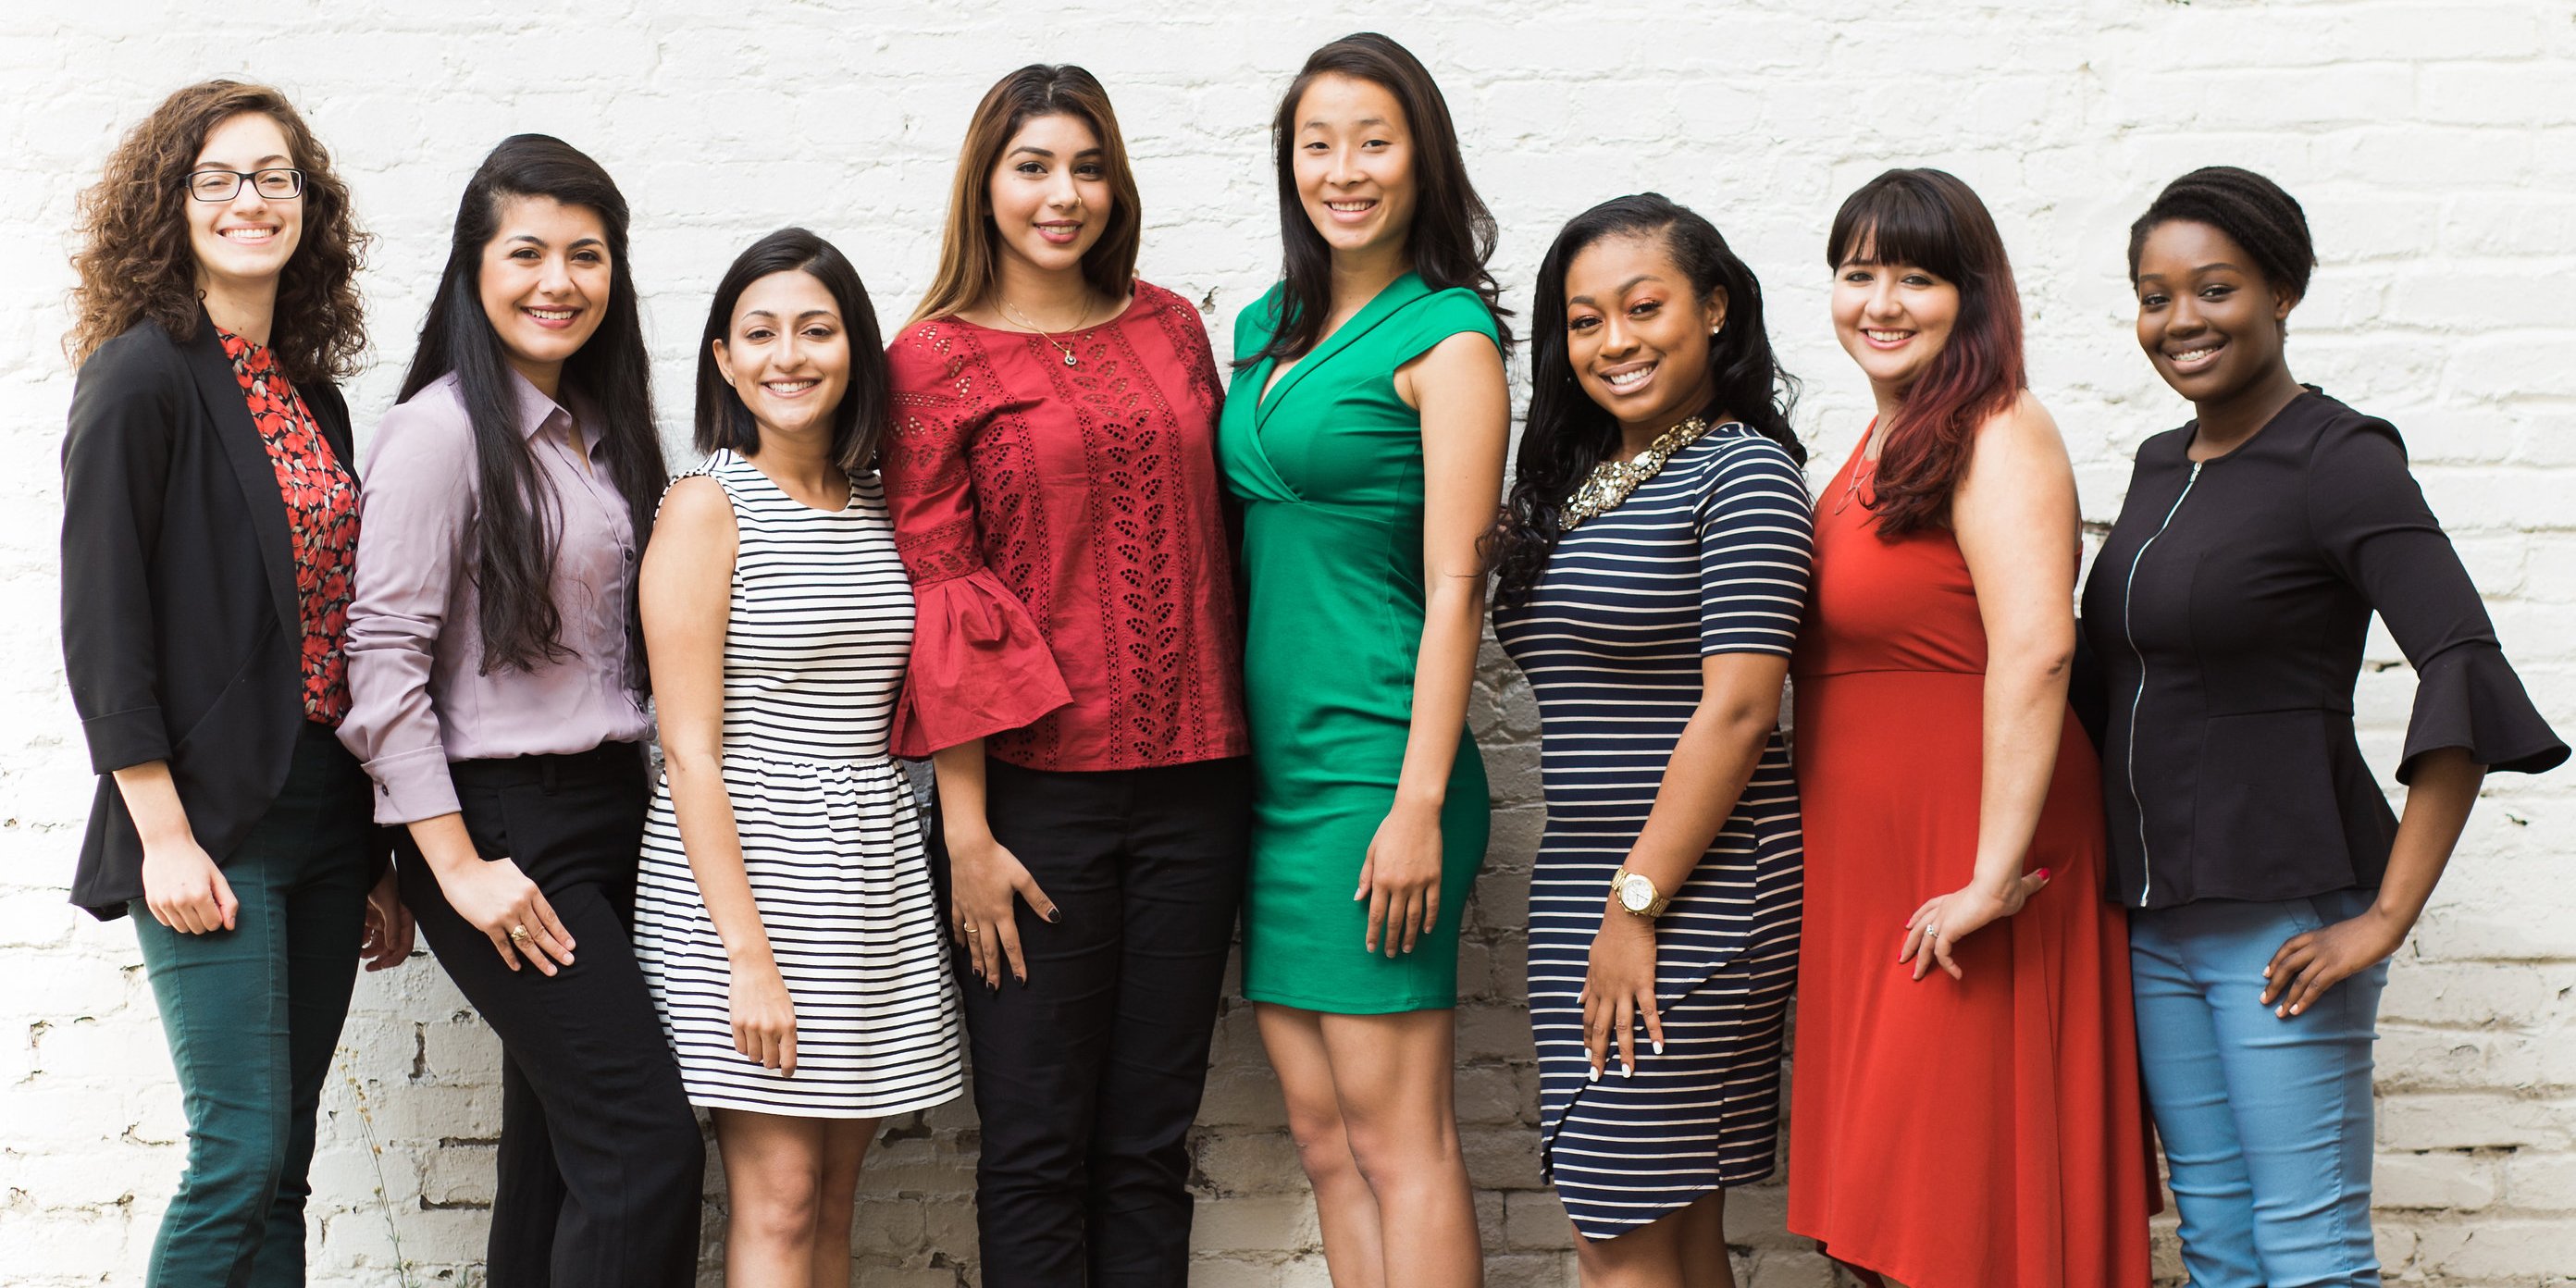 Meet the 2nd cohort of IGNITE Fellows.